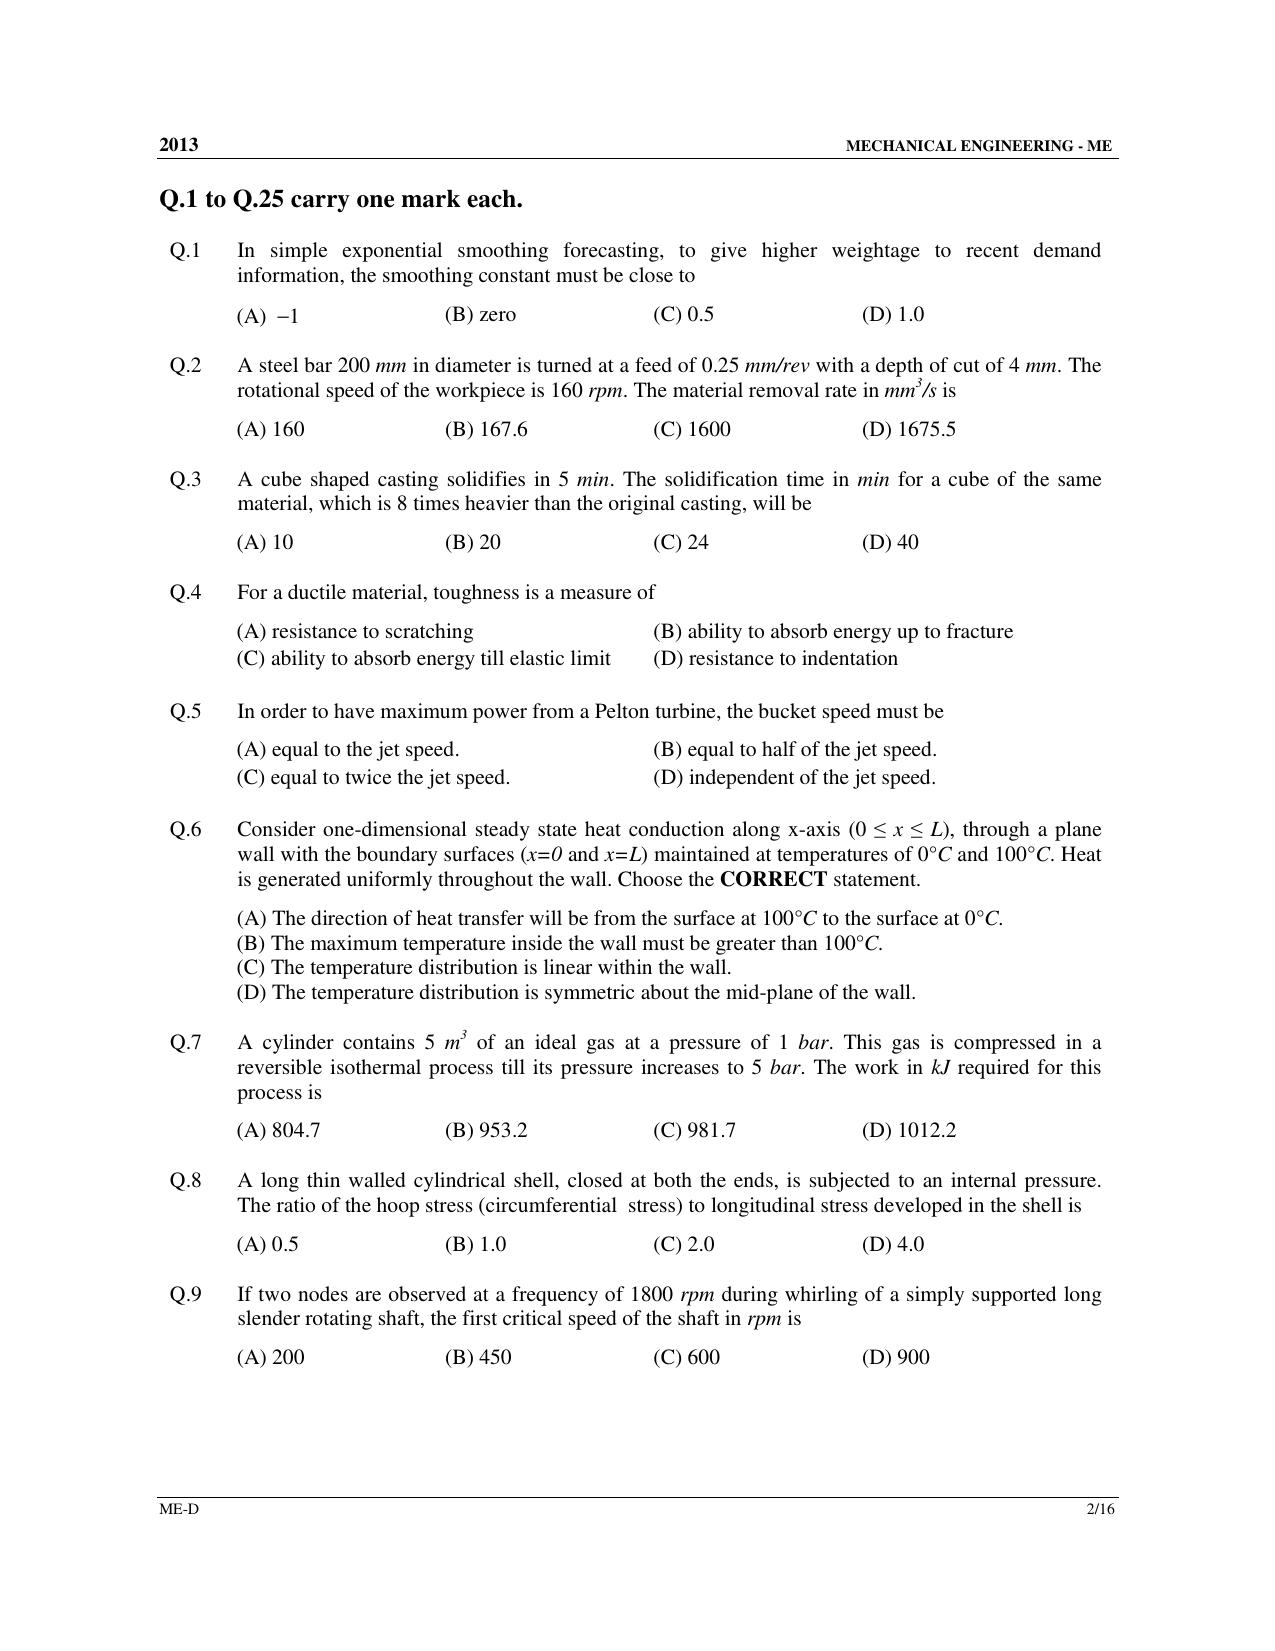 GATE 2013 Mechanical Engineering (ME) Question Paper with Answer Key - Page 45